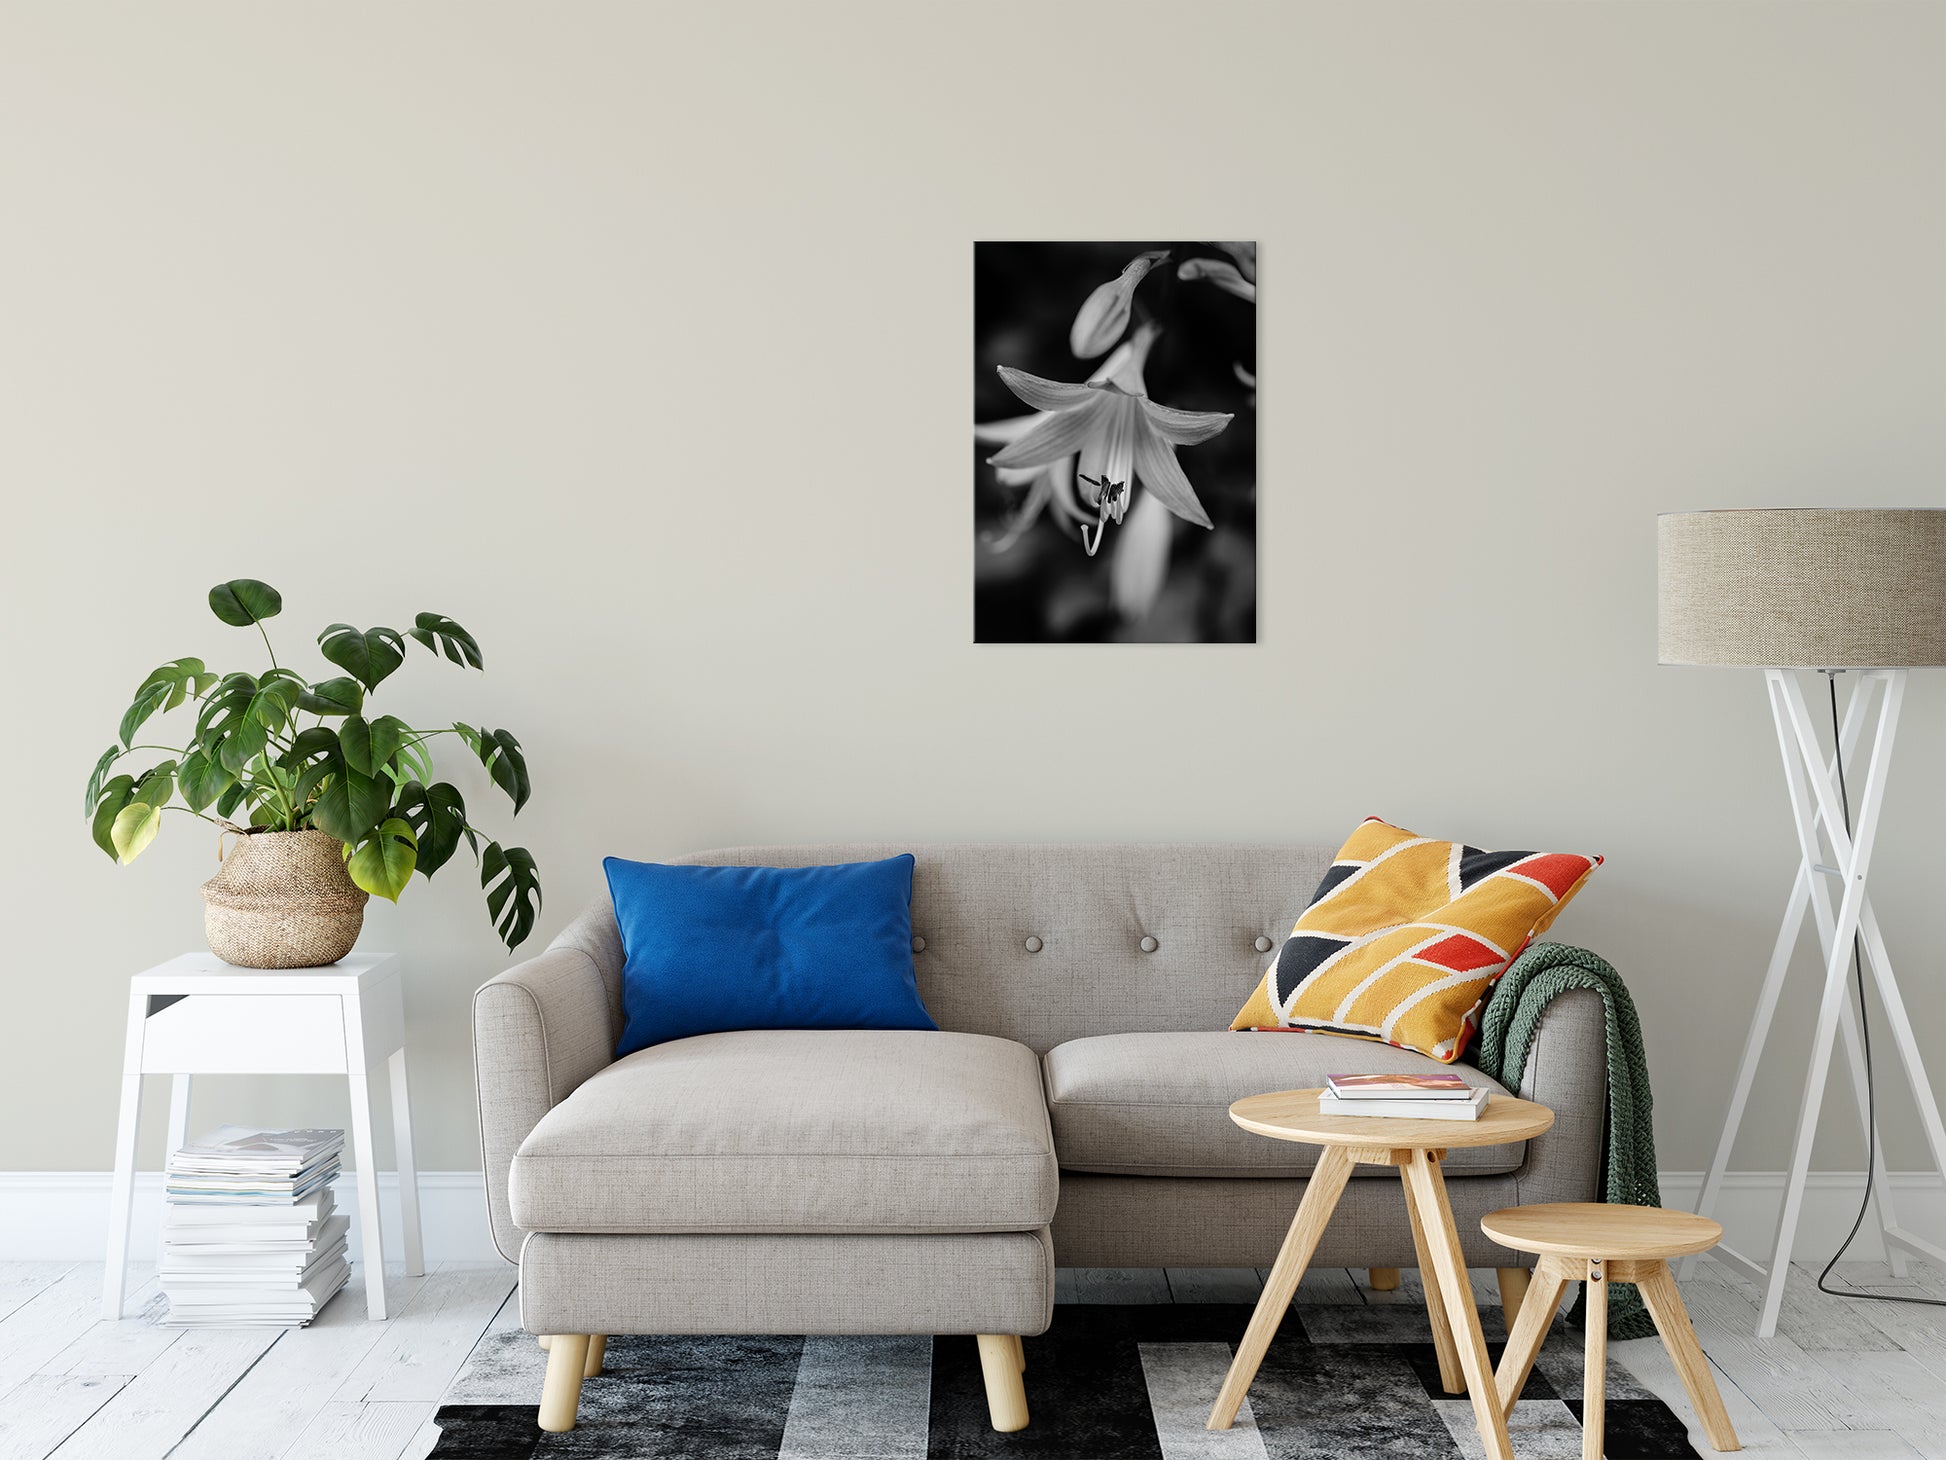 Hosta Bloom in Black & White Nature / Floral Photo Fine Art Canvas Wall Art Prints 20" x 30" - PIPAFINEART